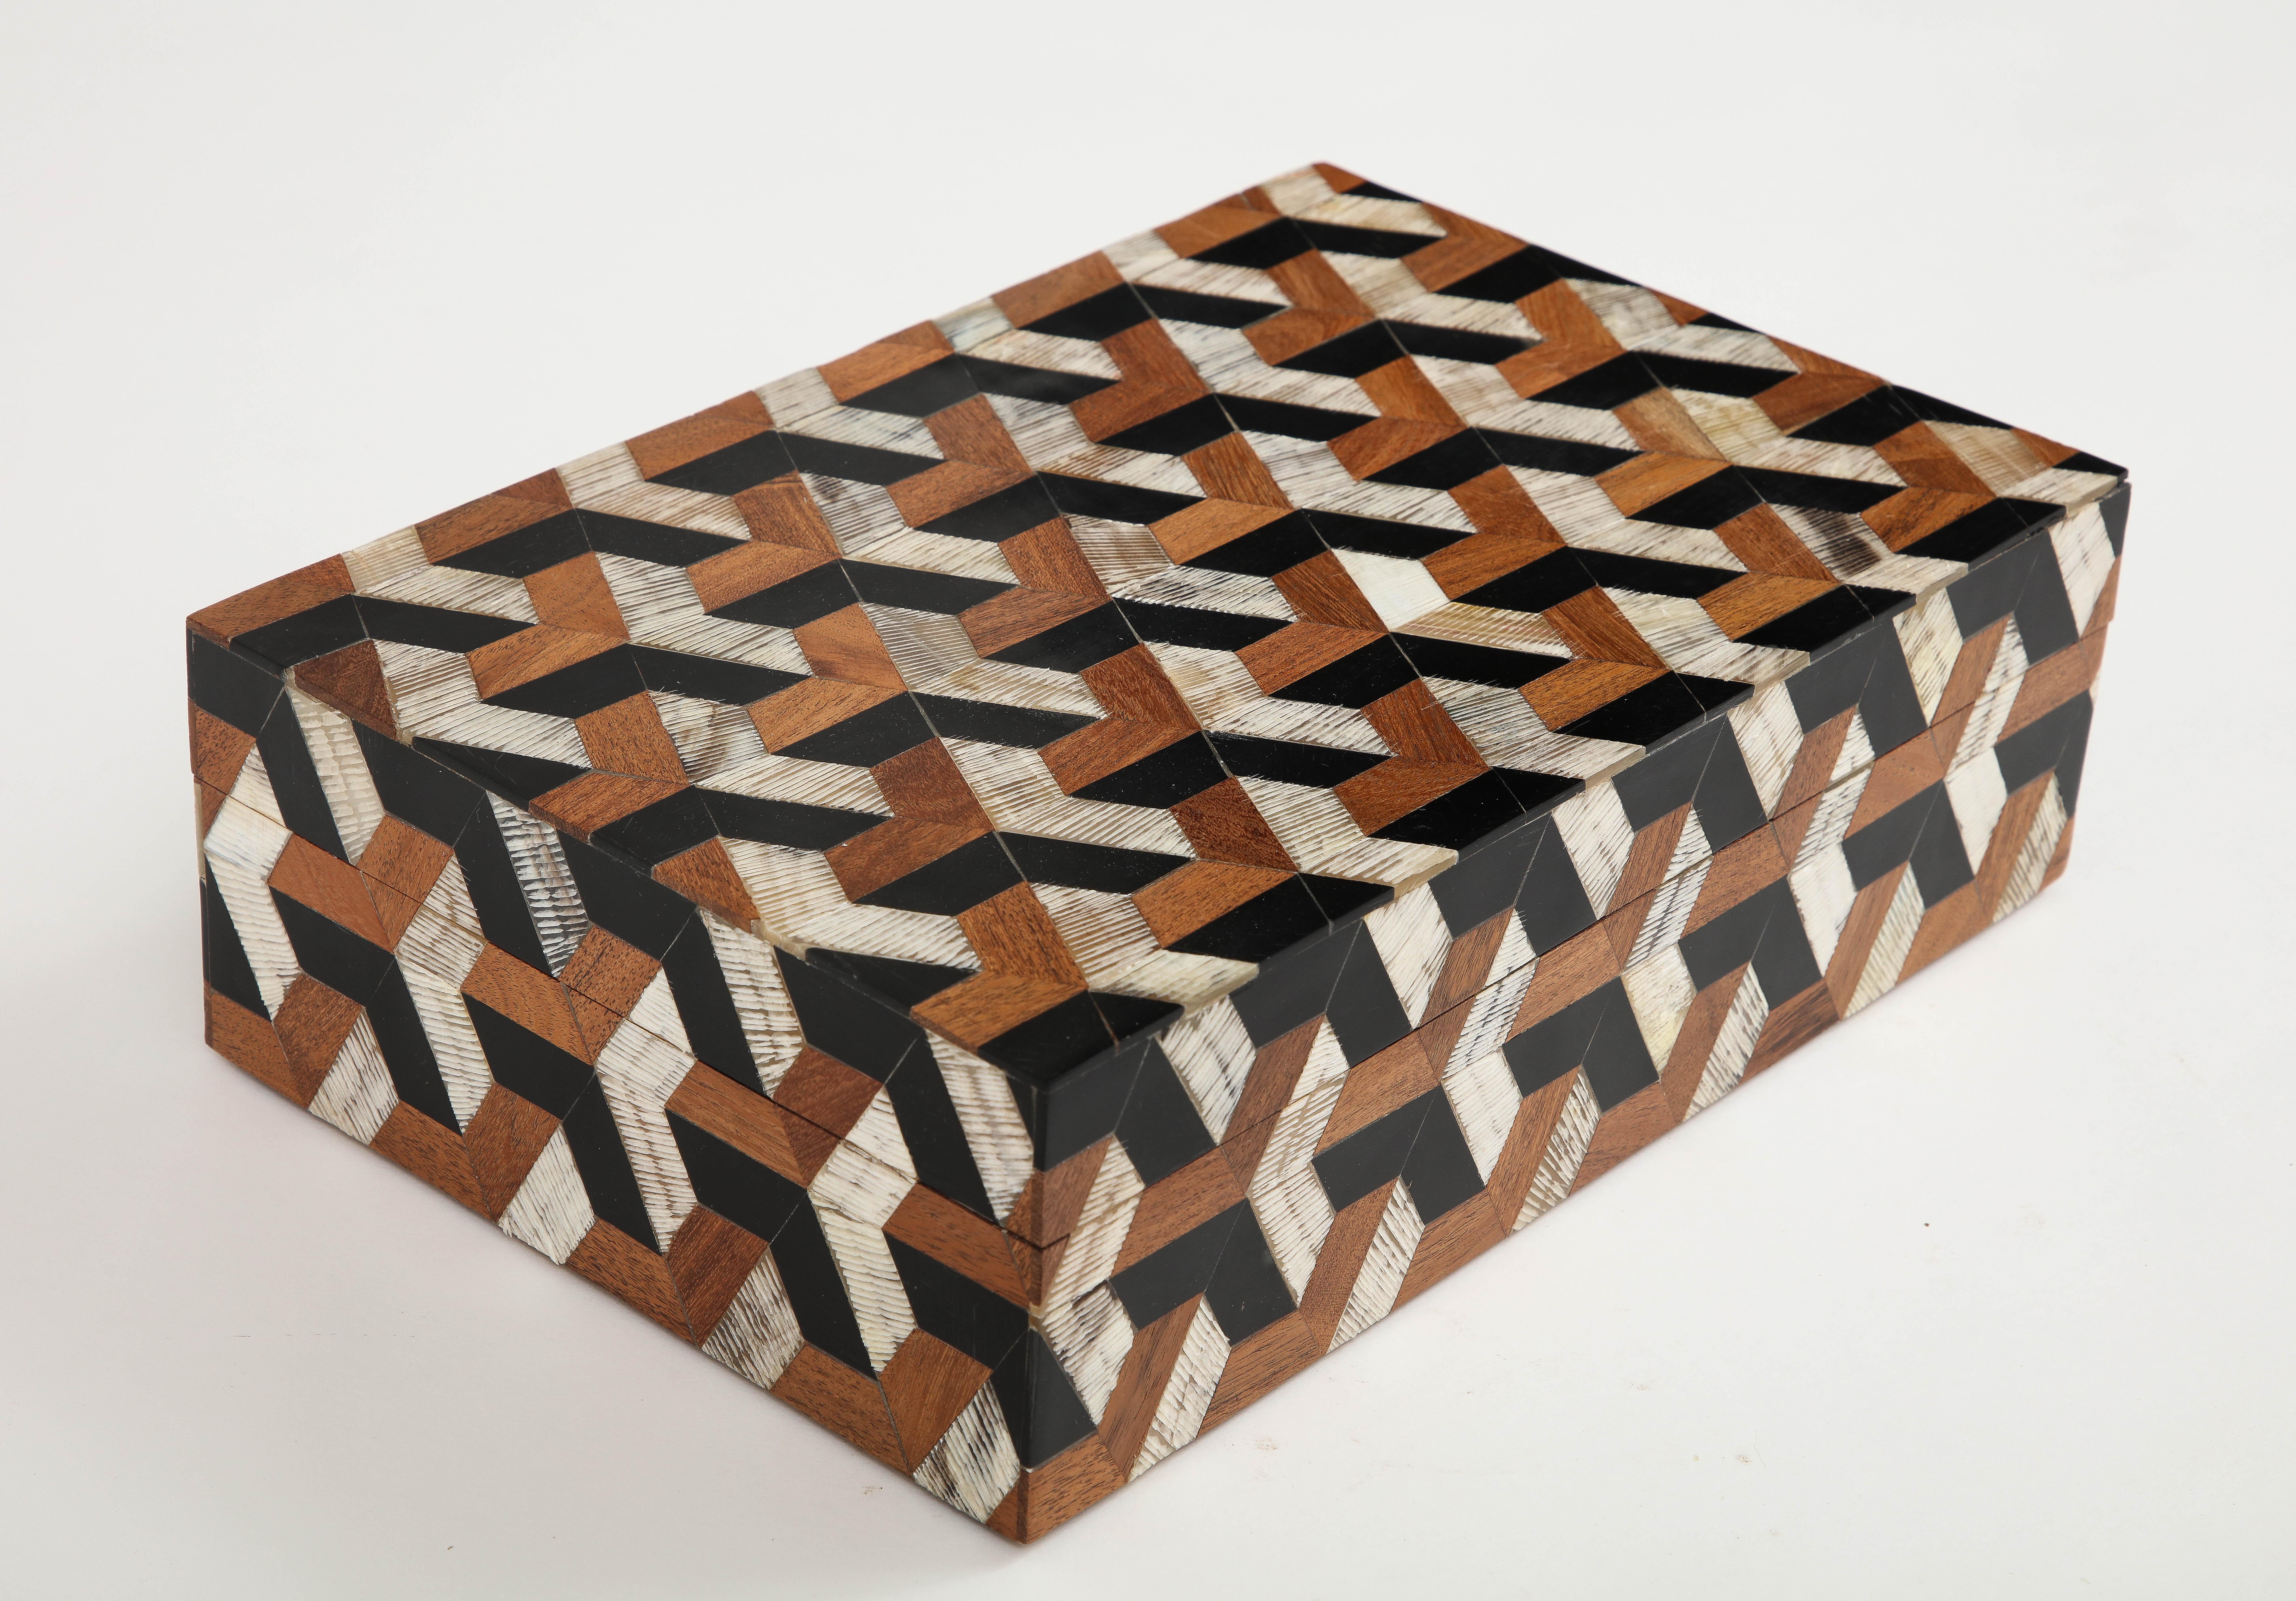 Hand made decorative keepsake box featuring a Goyard inspired pattern. Hand incised horn pieces add a uniqueness texture. A great addition to any coffee table or desk. Measures: 12x8.